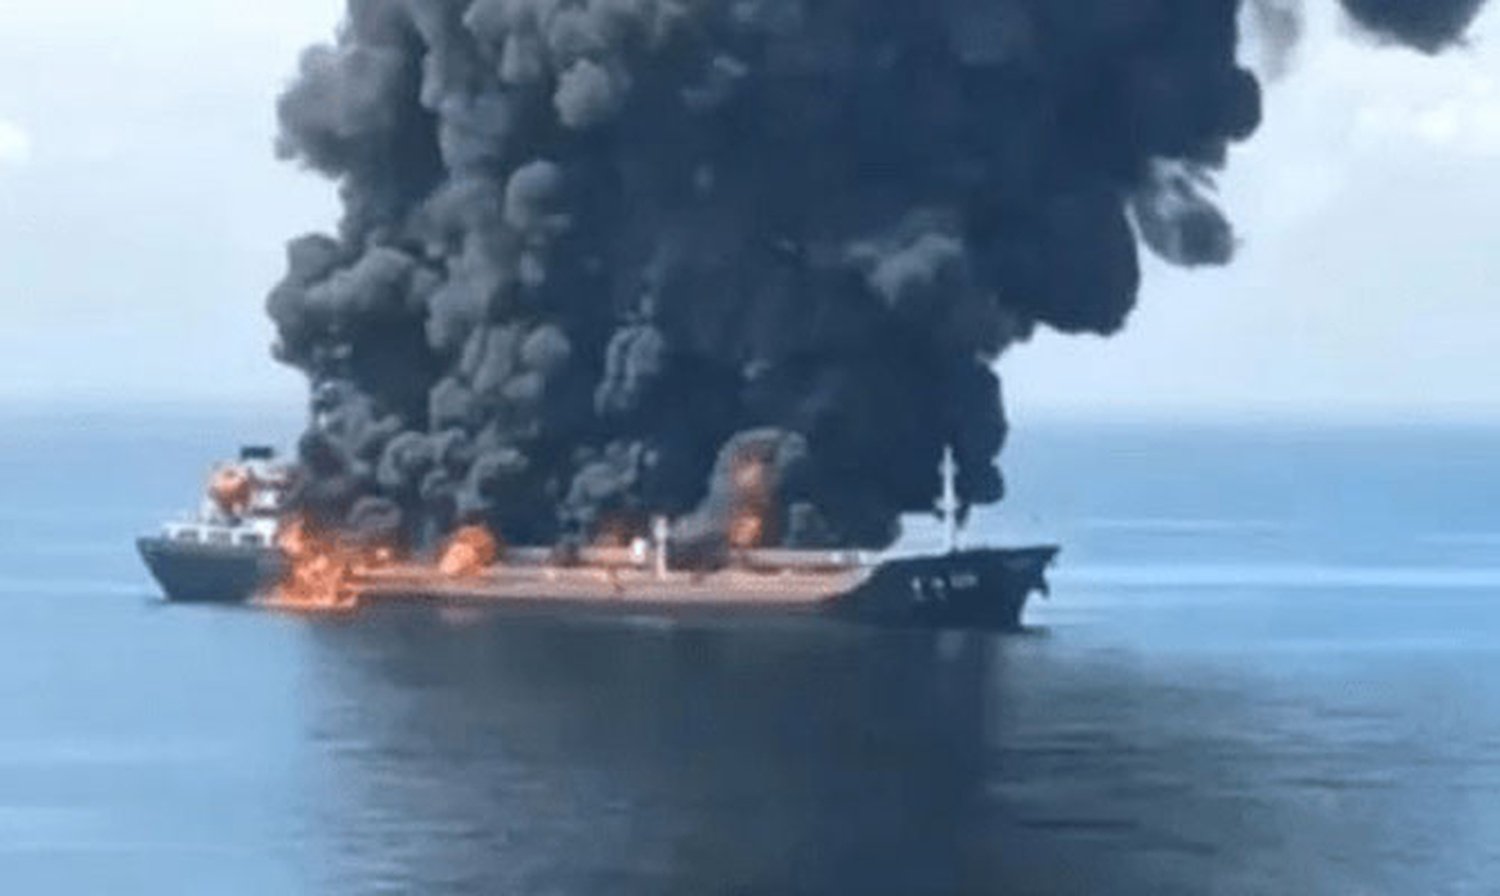 MARITIME ACCIDENT: Tanker engulfed in flames in South China